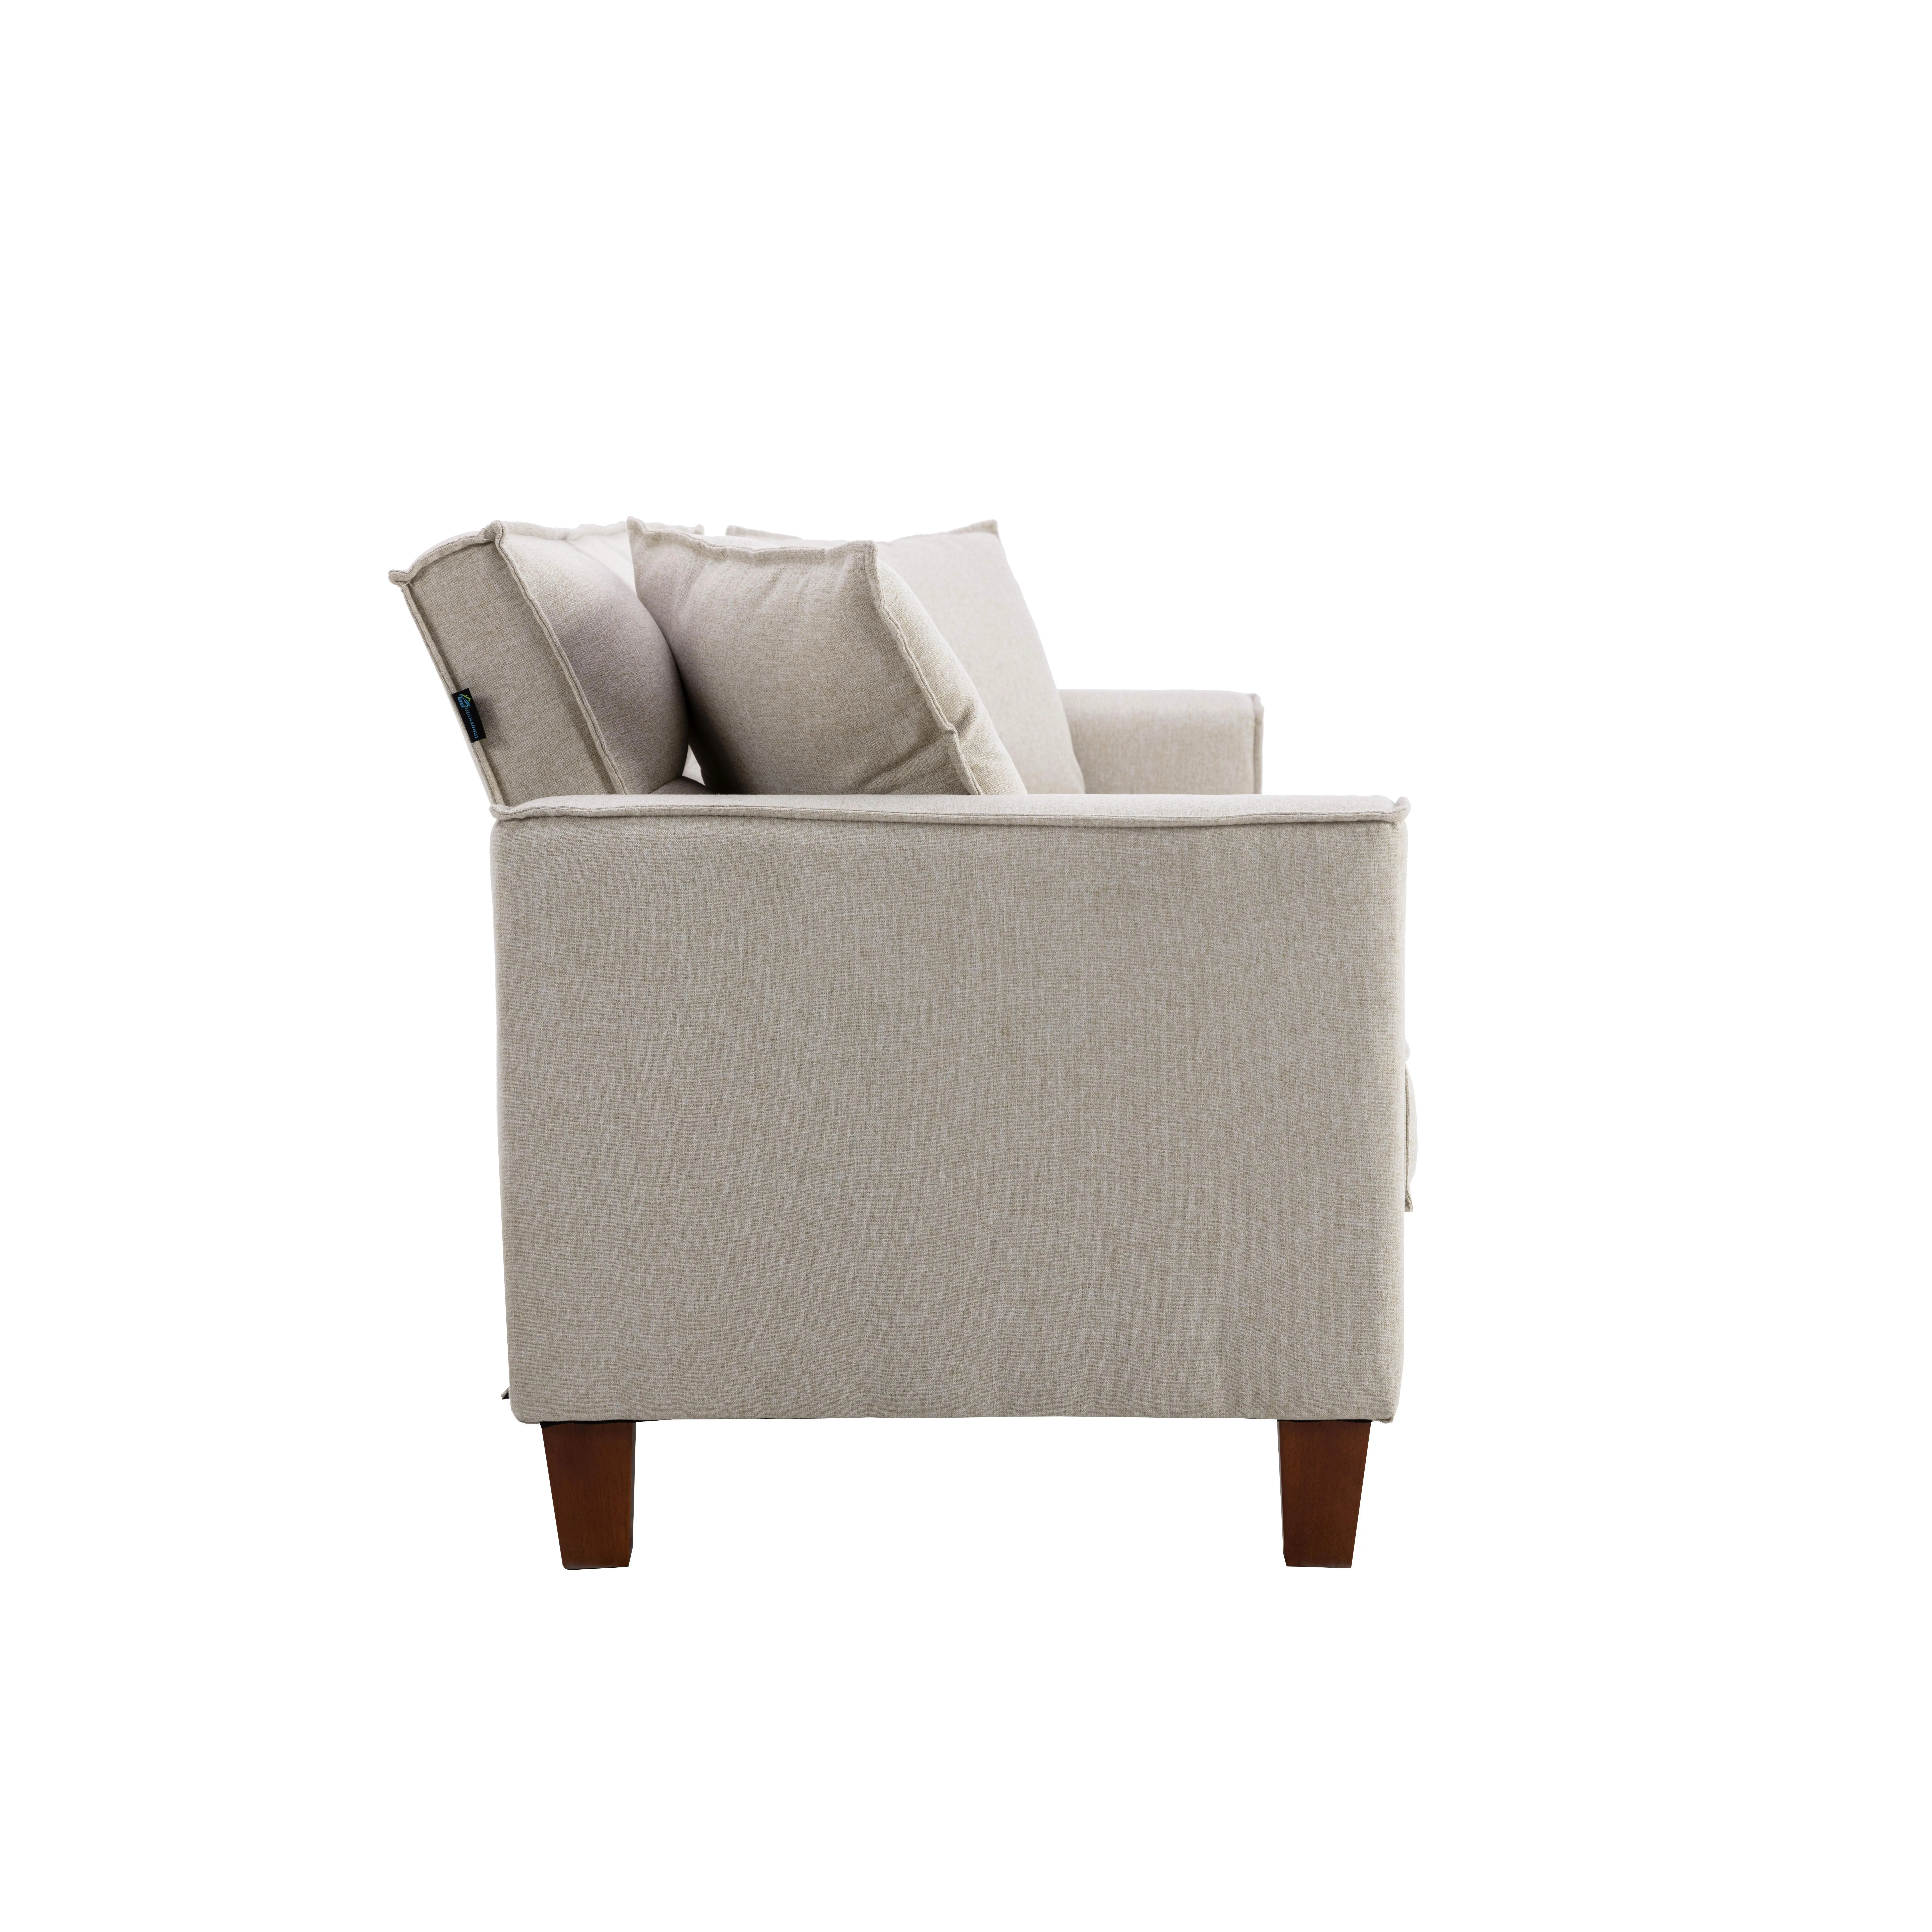 hot selling solid color sofa easy assemble 2 seater furniture breathable linen sofa stool,beige